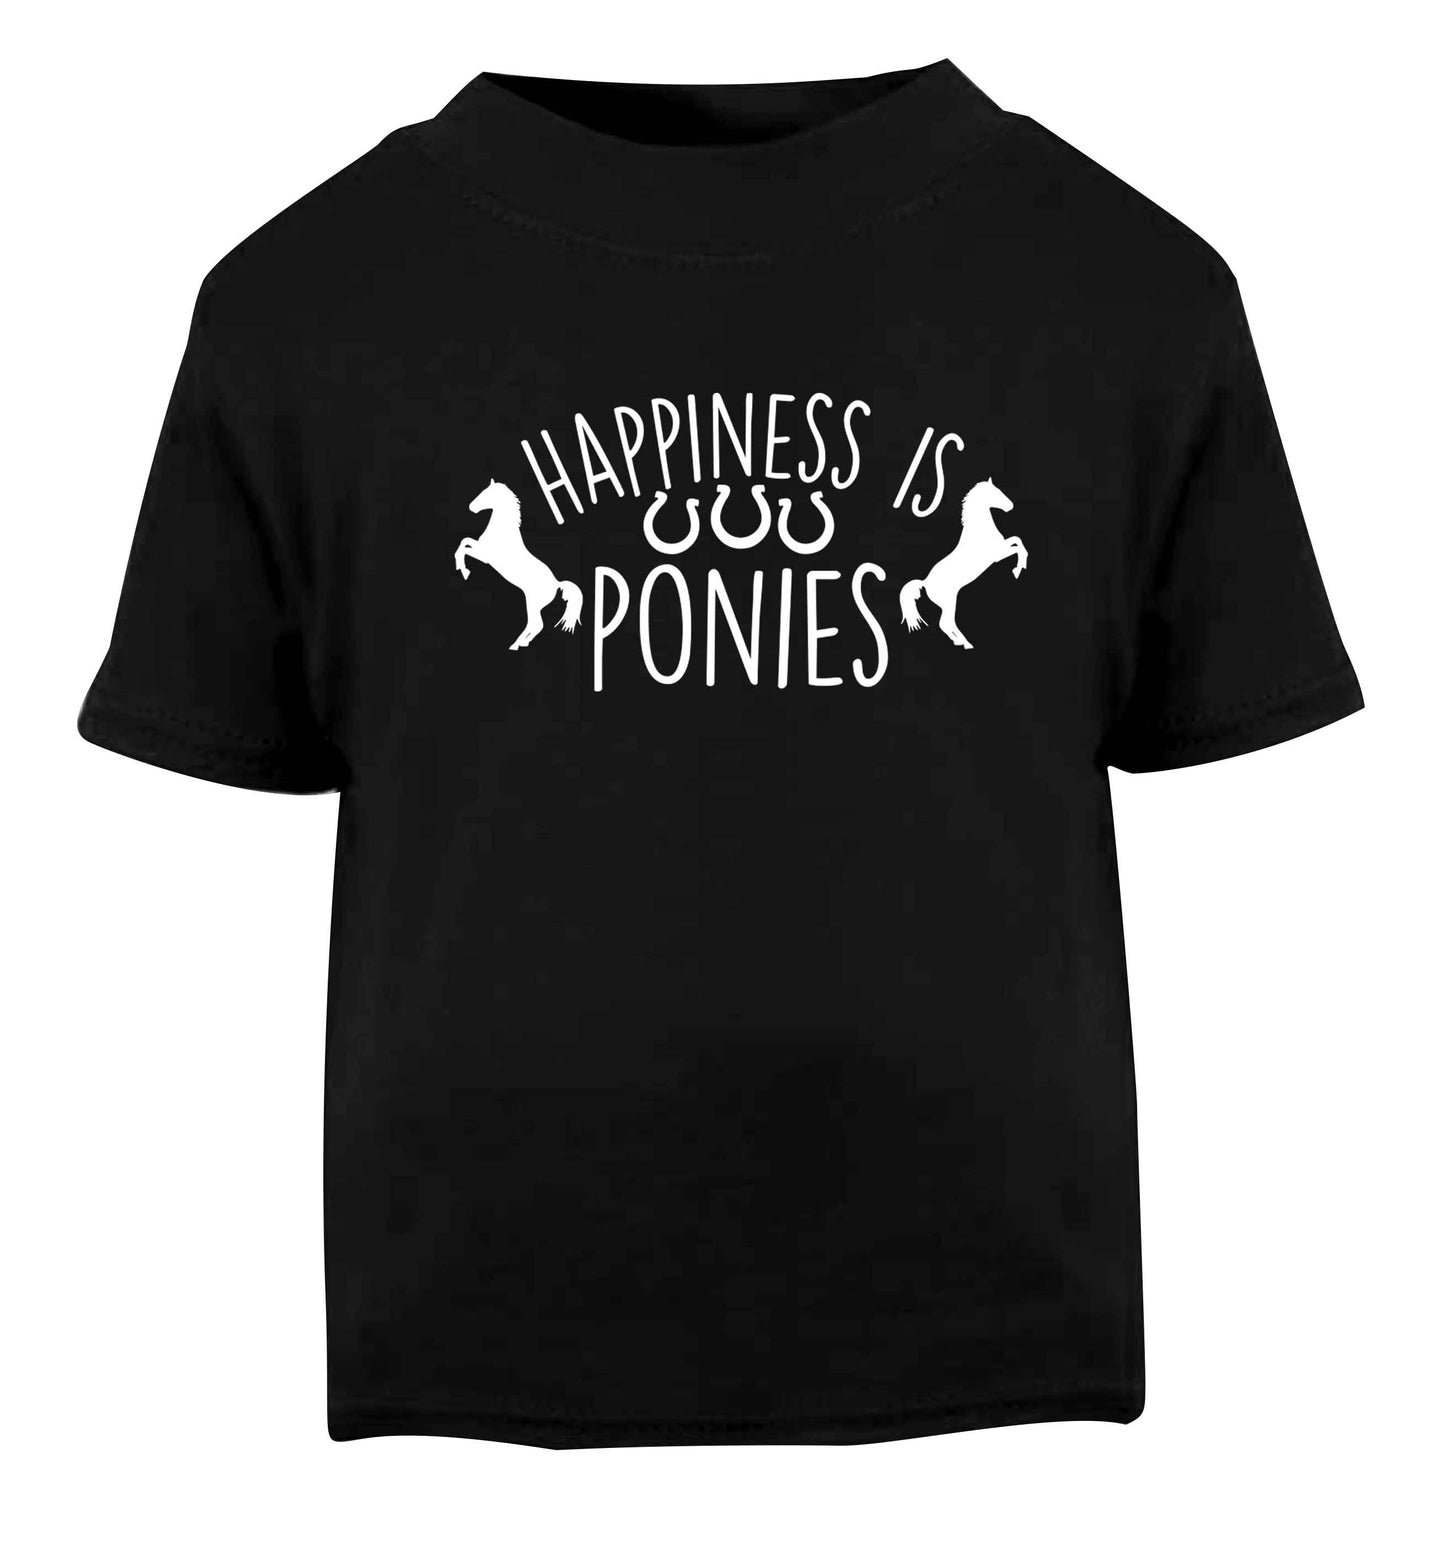 Happiness is ponies Black baby toddler Tshirt 2 years